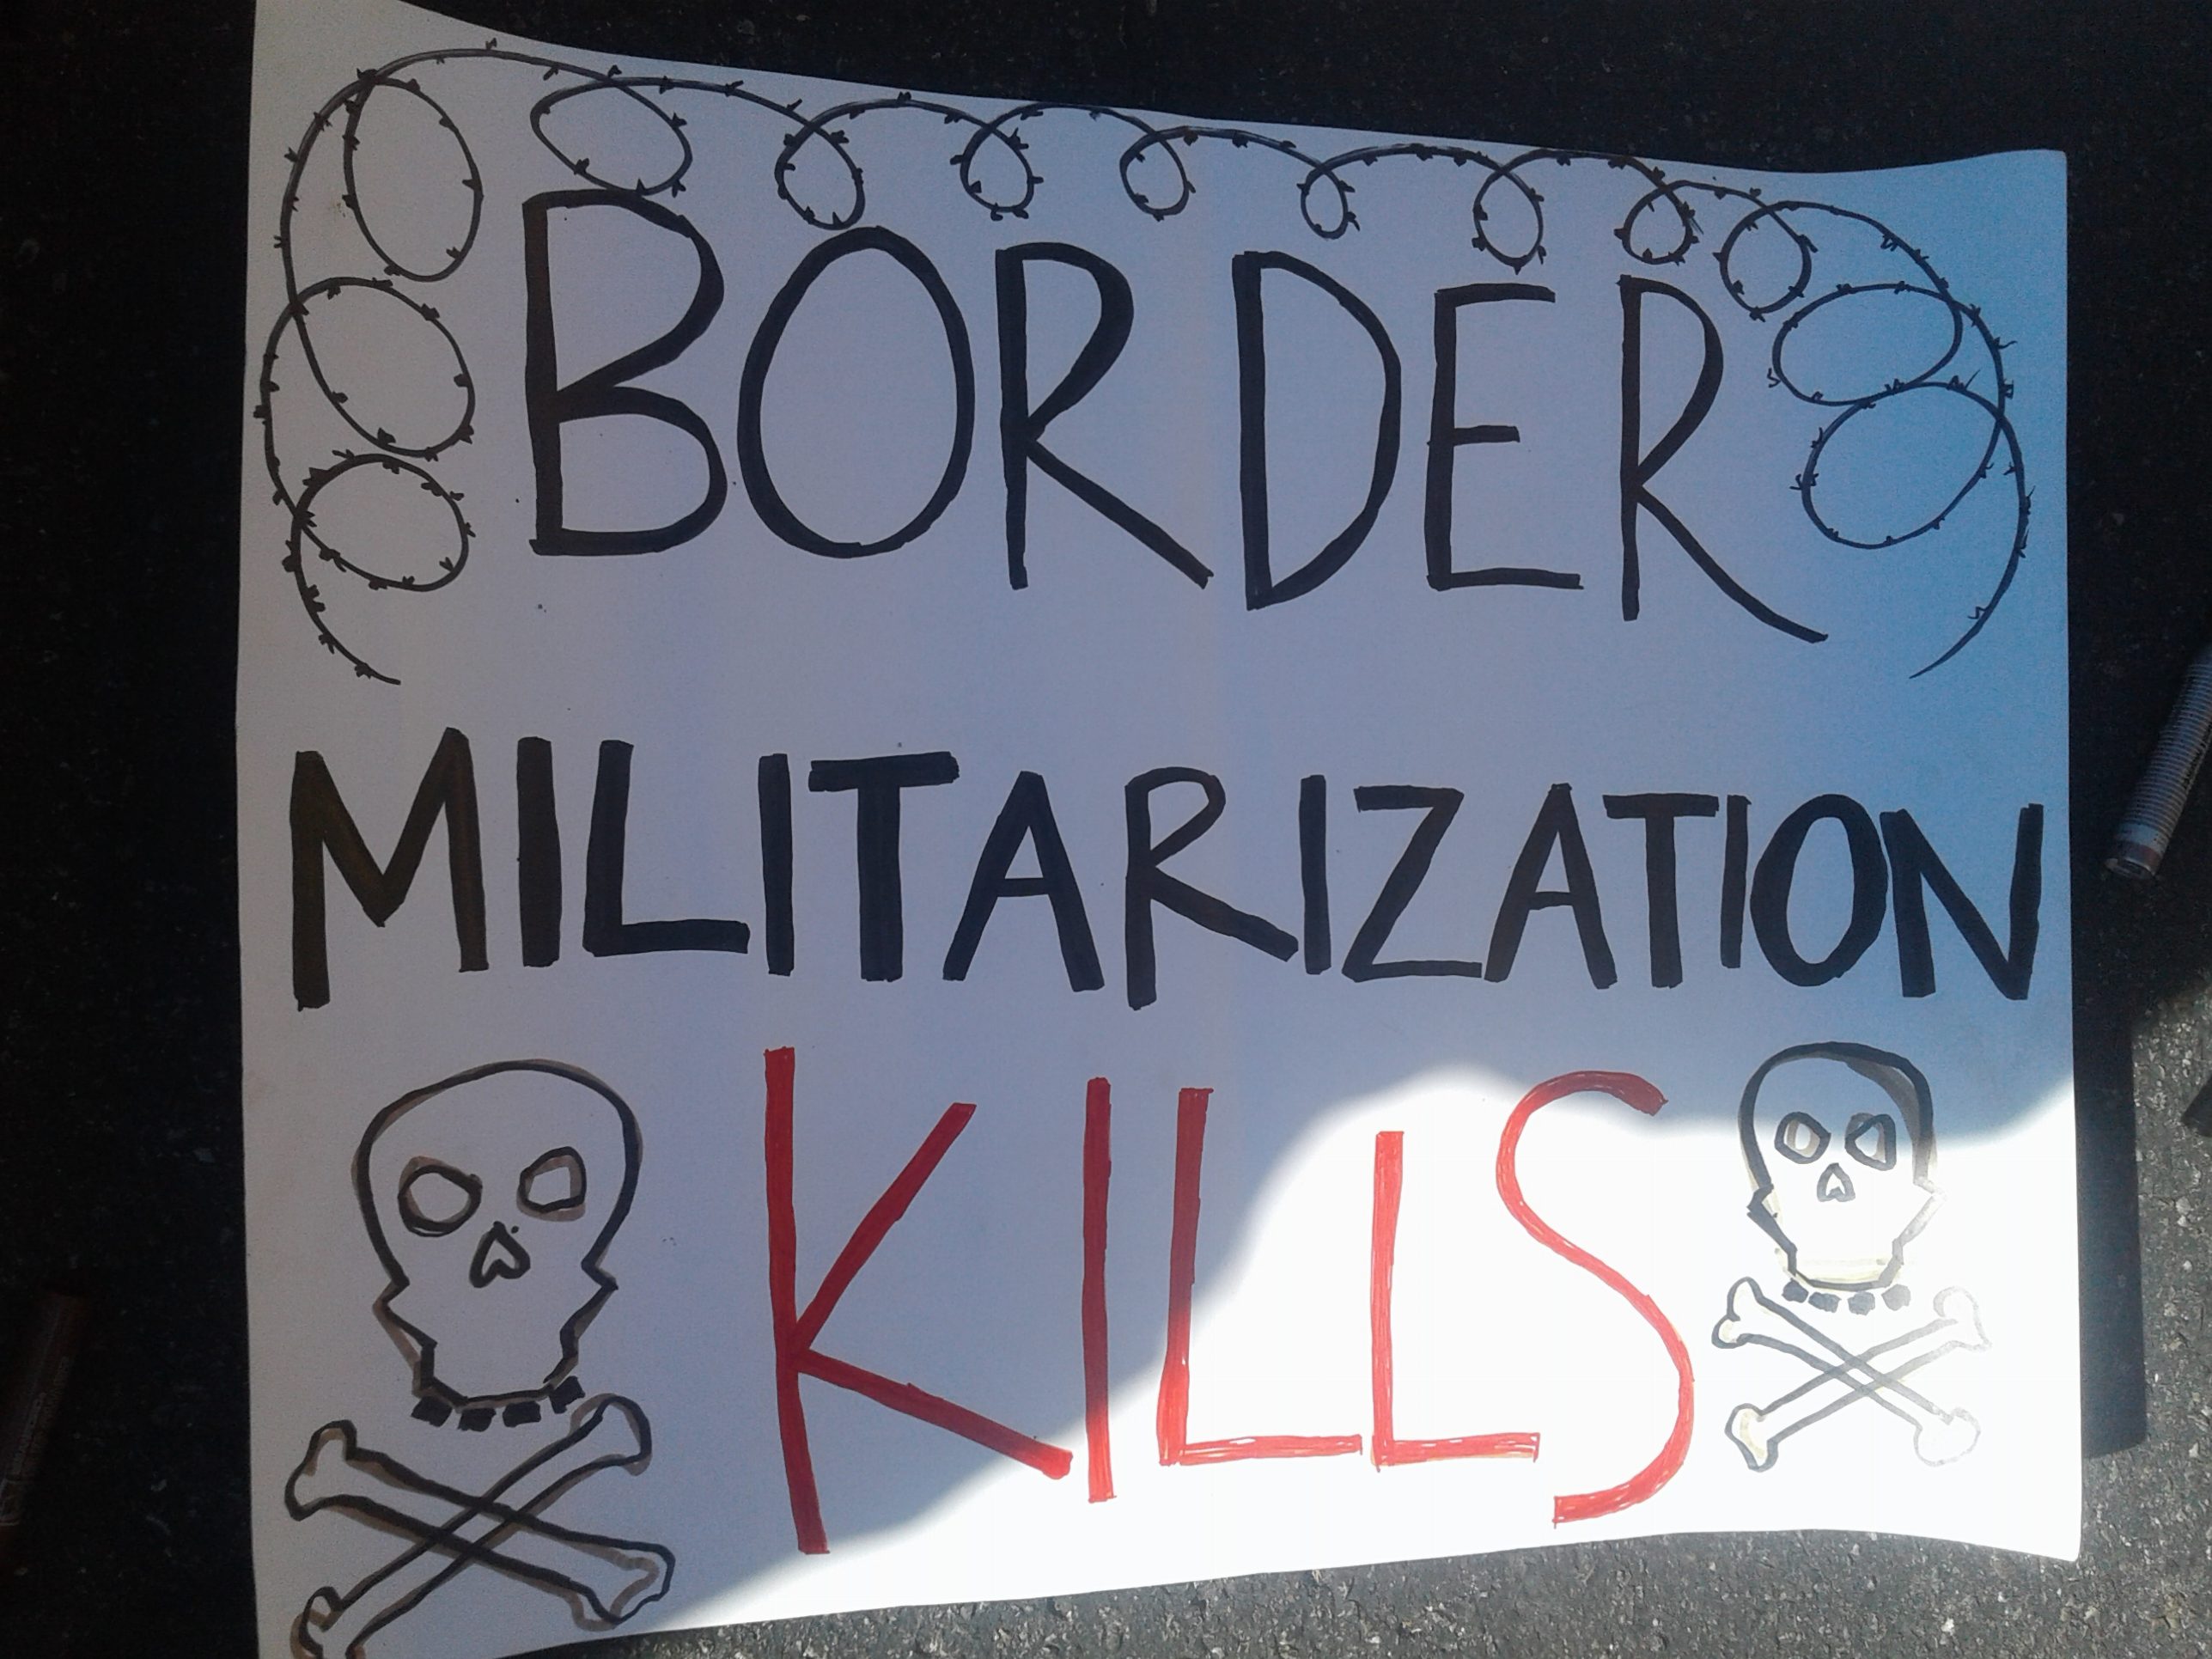 white sign with skull and crossbones and barbed wire, saying in black and red text: "BORDER MILITARIZATION KILLS"